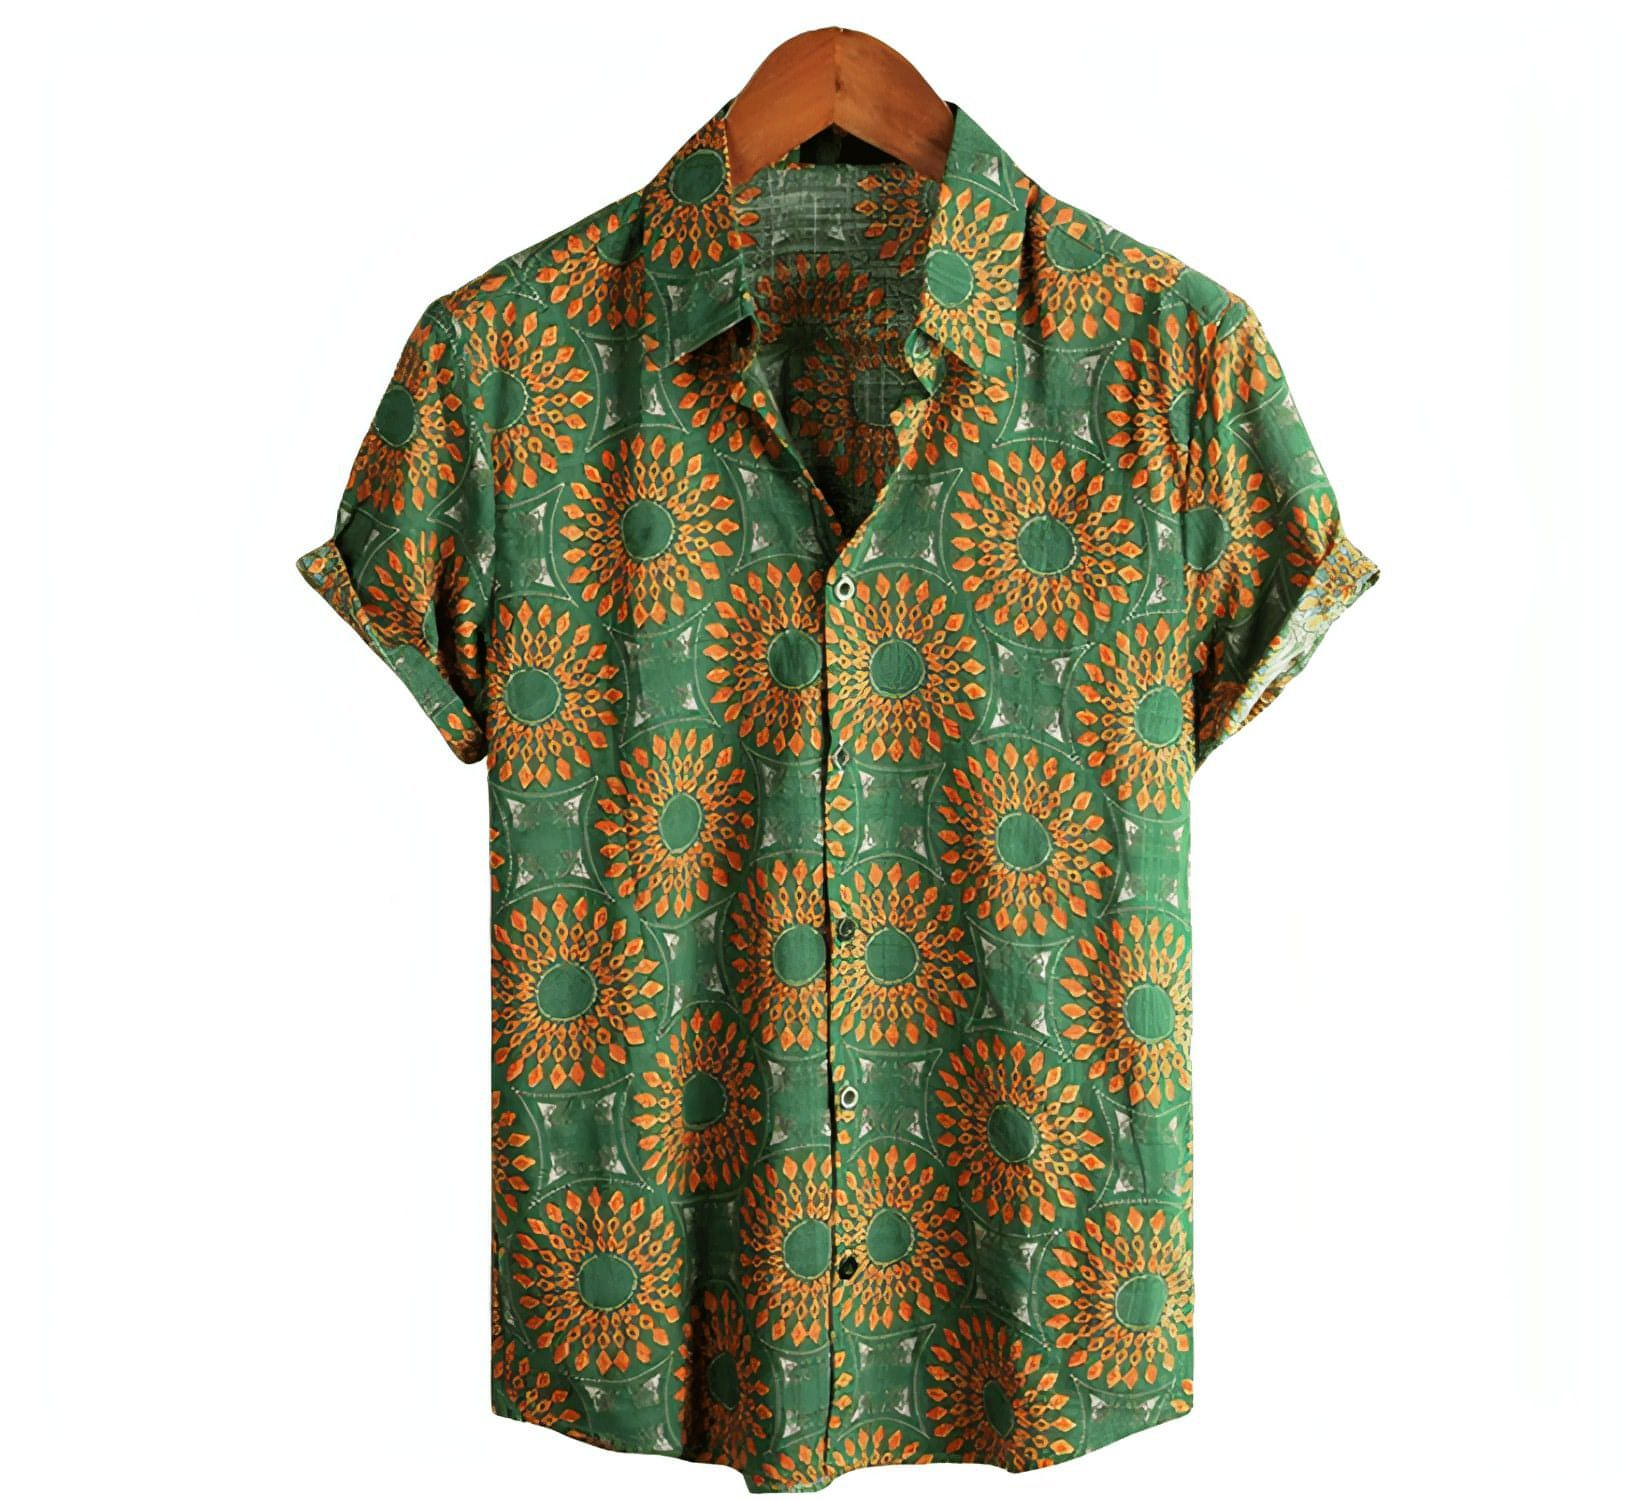 Buy Unique Men's Patterned Button Up Shirts at Dan Flashes